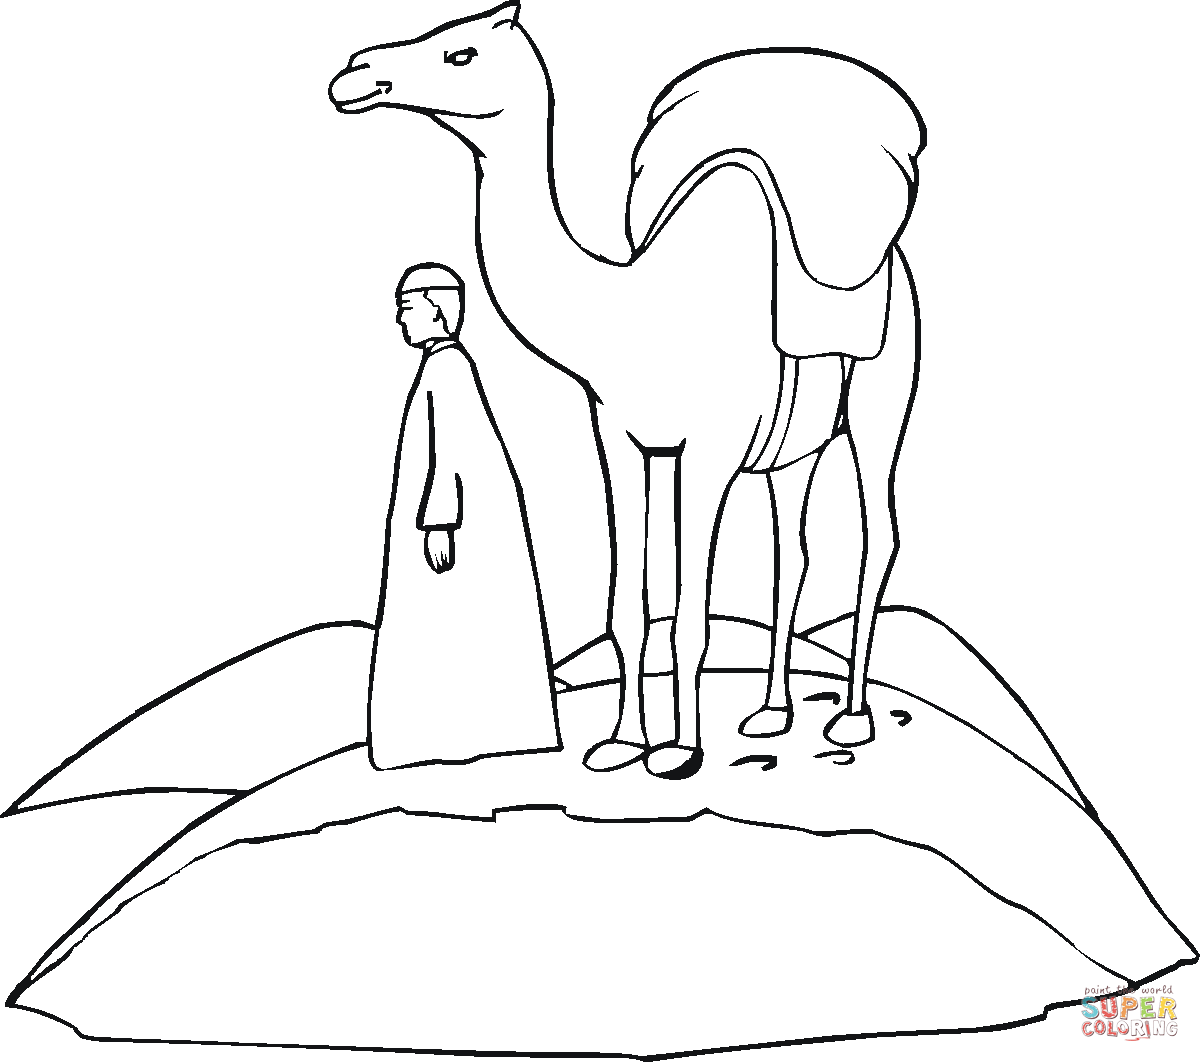 Loaded camel on the go through desert coloring page | Free ...